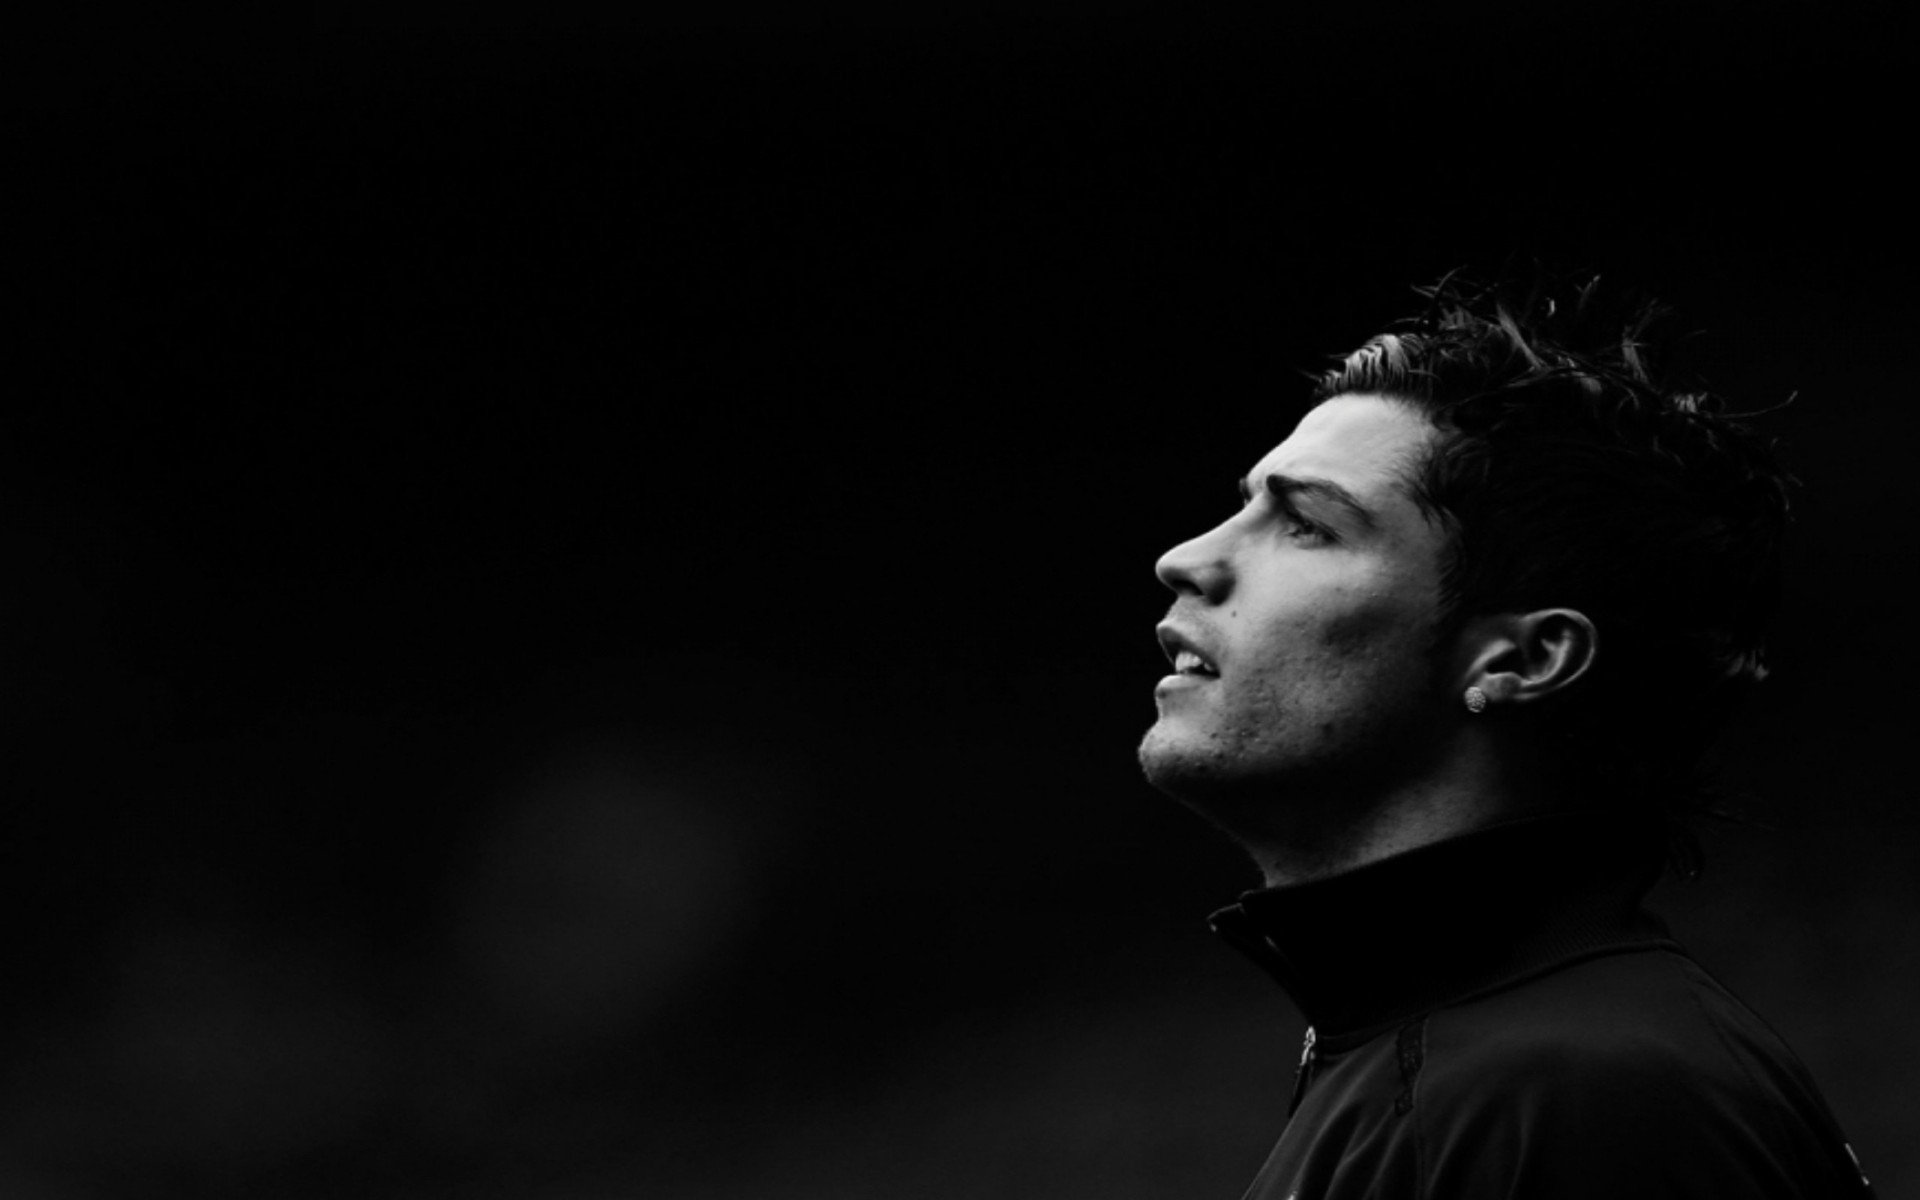 Ronaldo 4k Wallpapers For Your Desktop Or Mobile Screen Free And Easy To Download